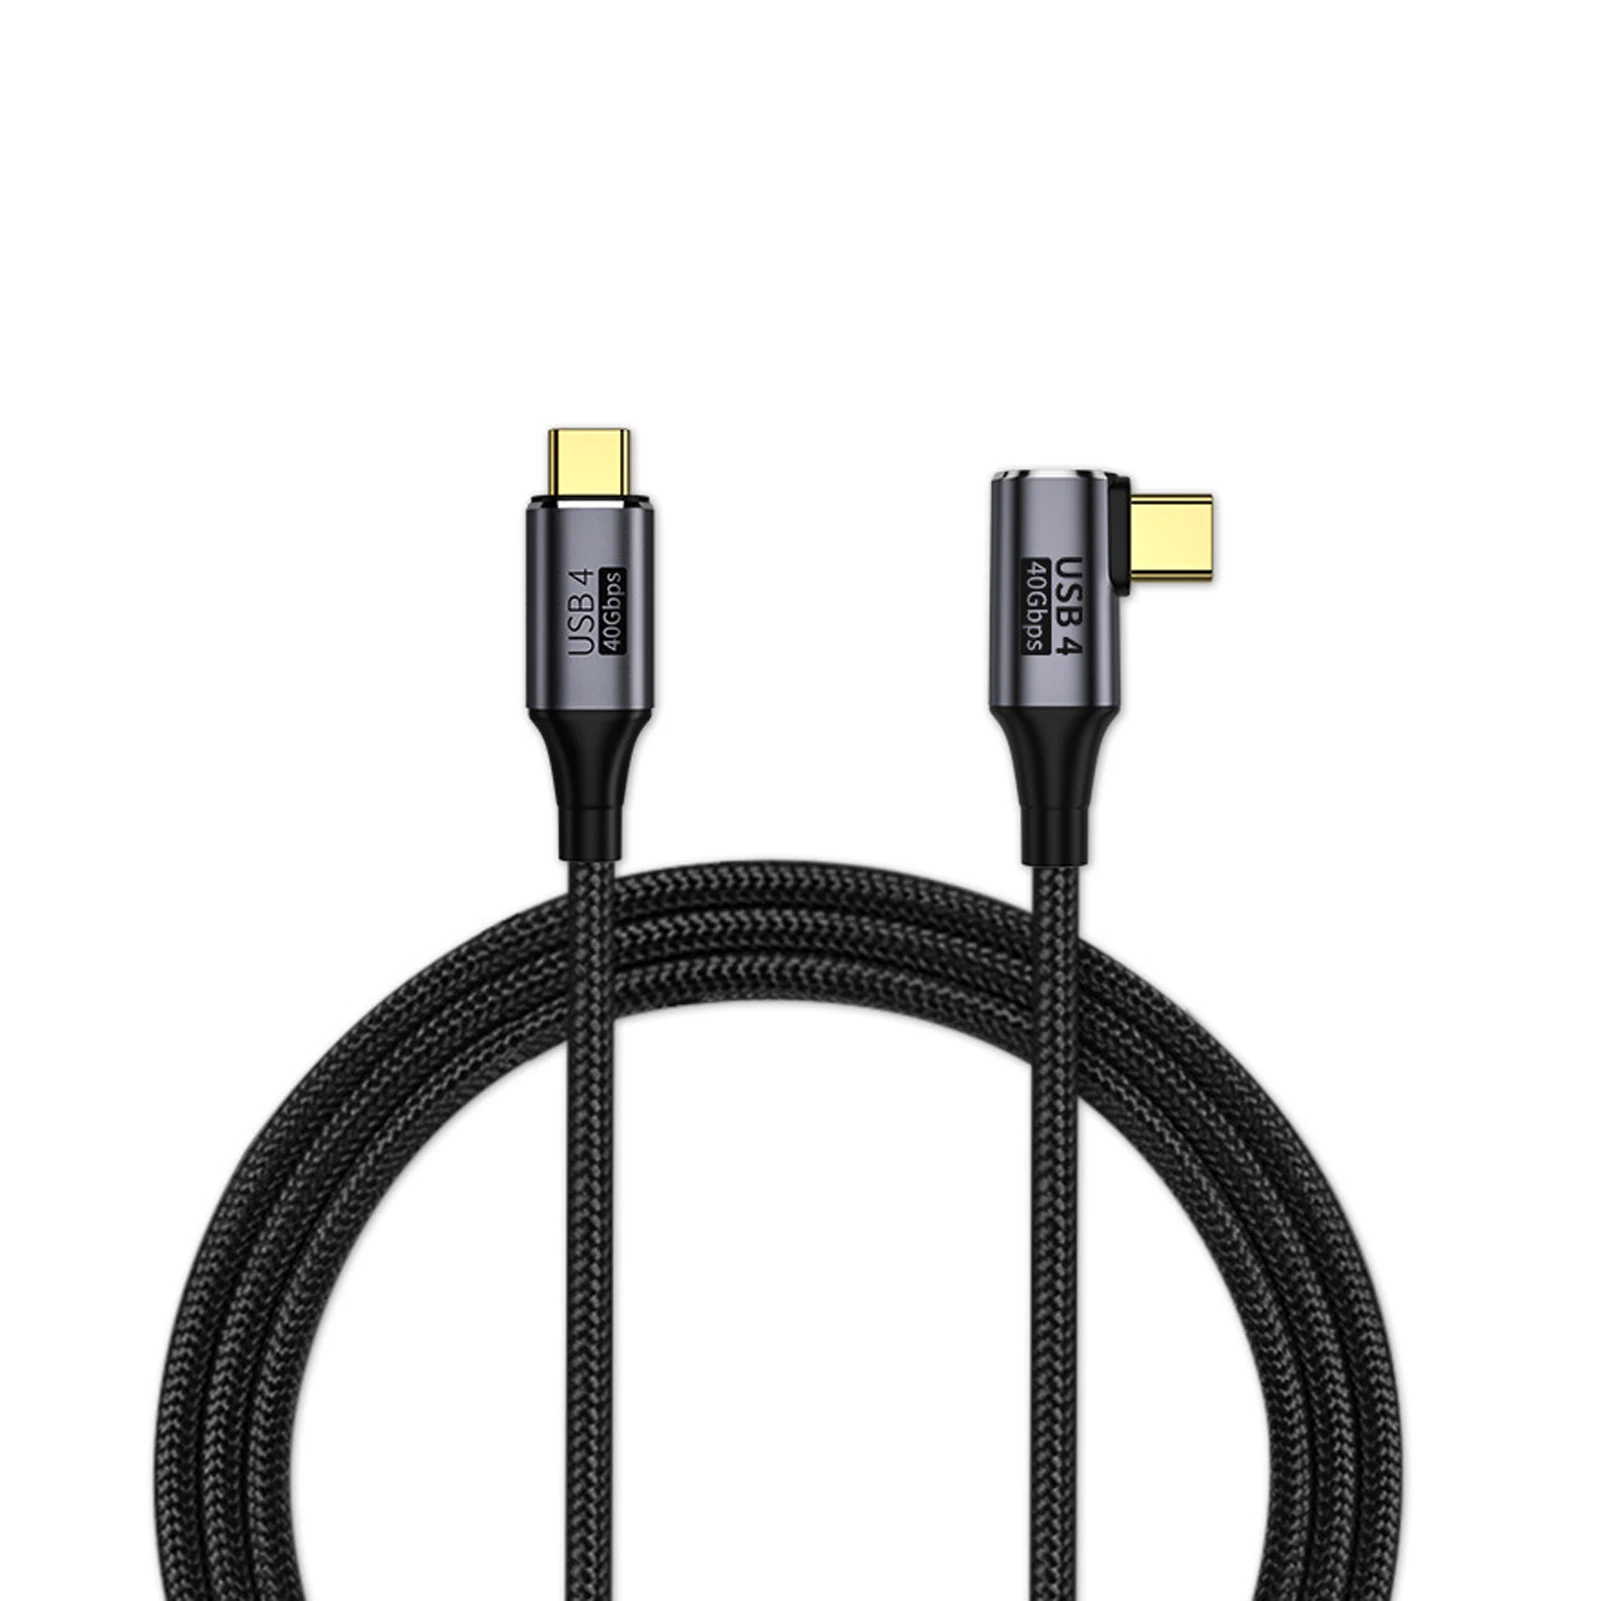 

USB 4 Cable 40Gbps 100w 40Gbps Data Transfer Cable Supports PD3.0 / QC3.0 Power Supply Support Ultra HD Resolutions Right-Angle